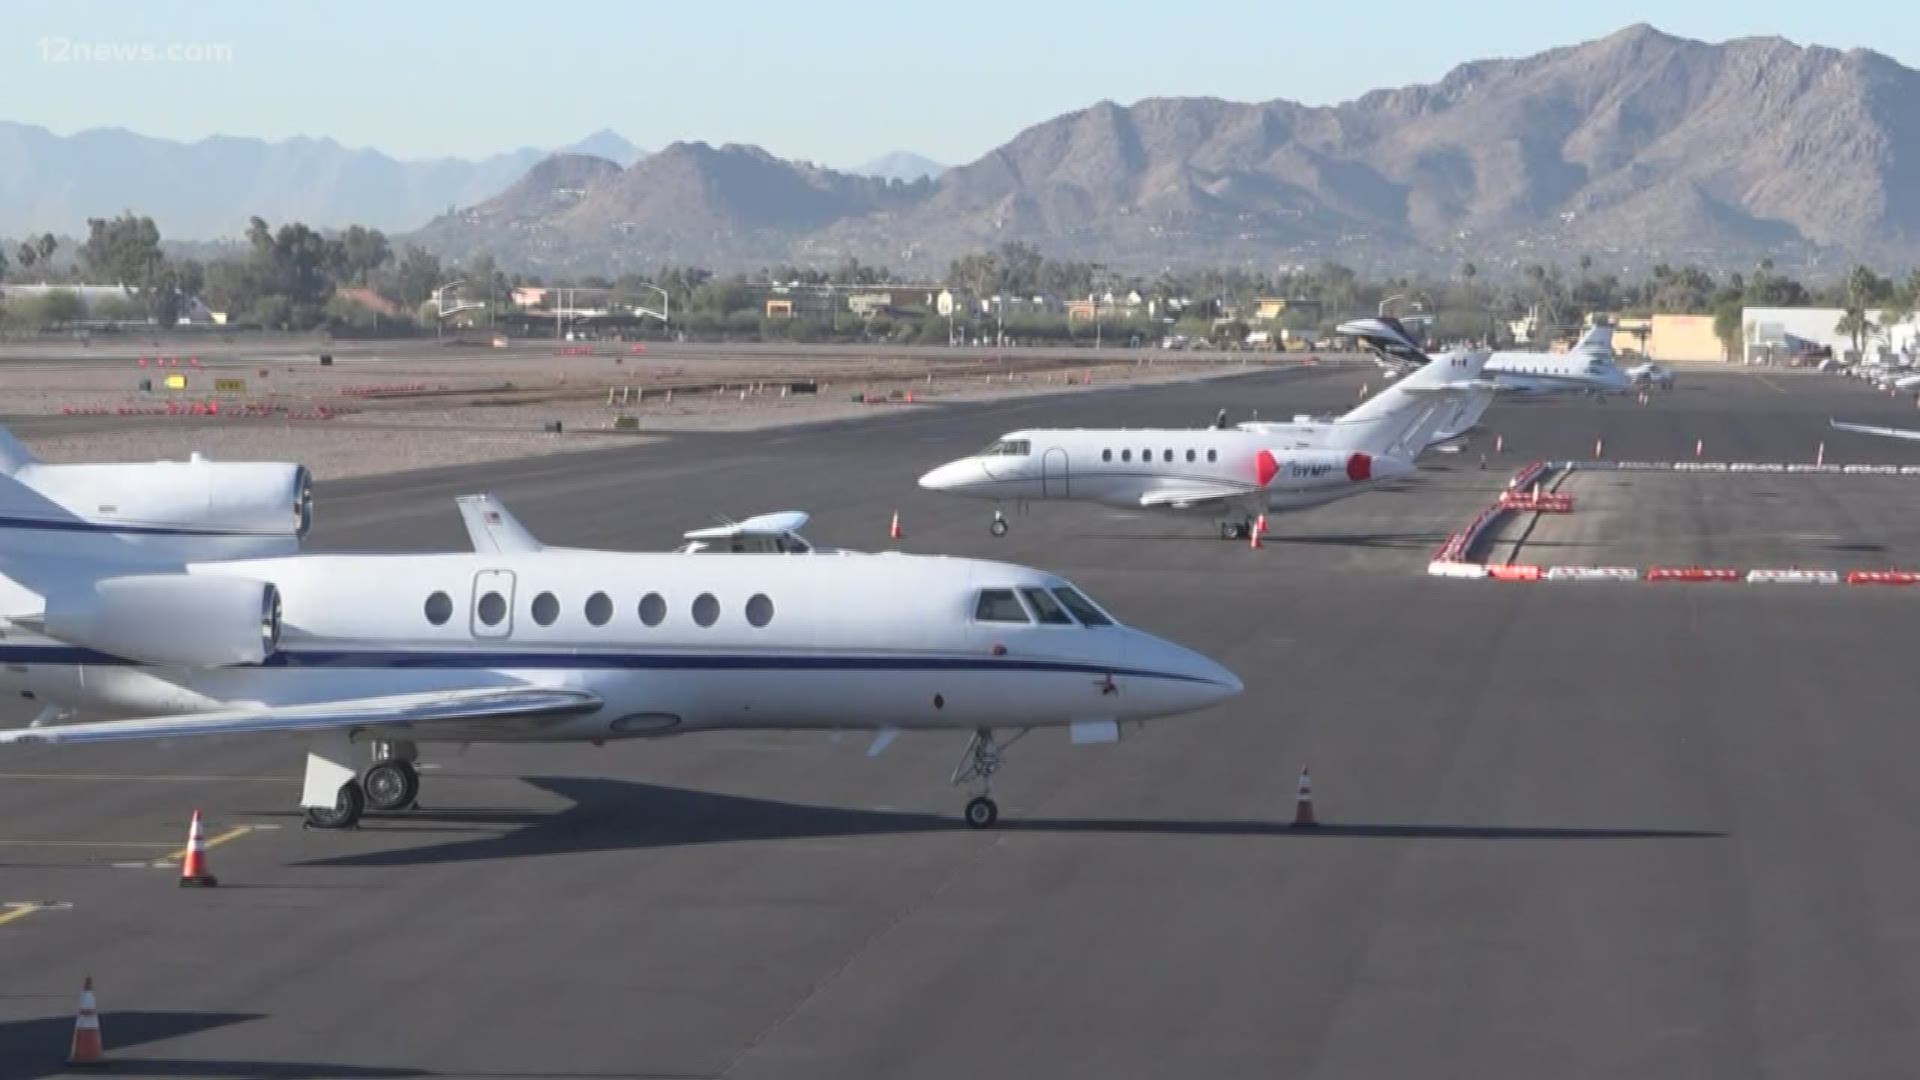 12 News gets a behind-the-scenes look inside a $24 million private jet in Scottsdale.